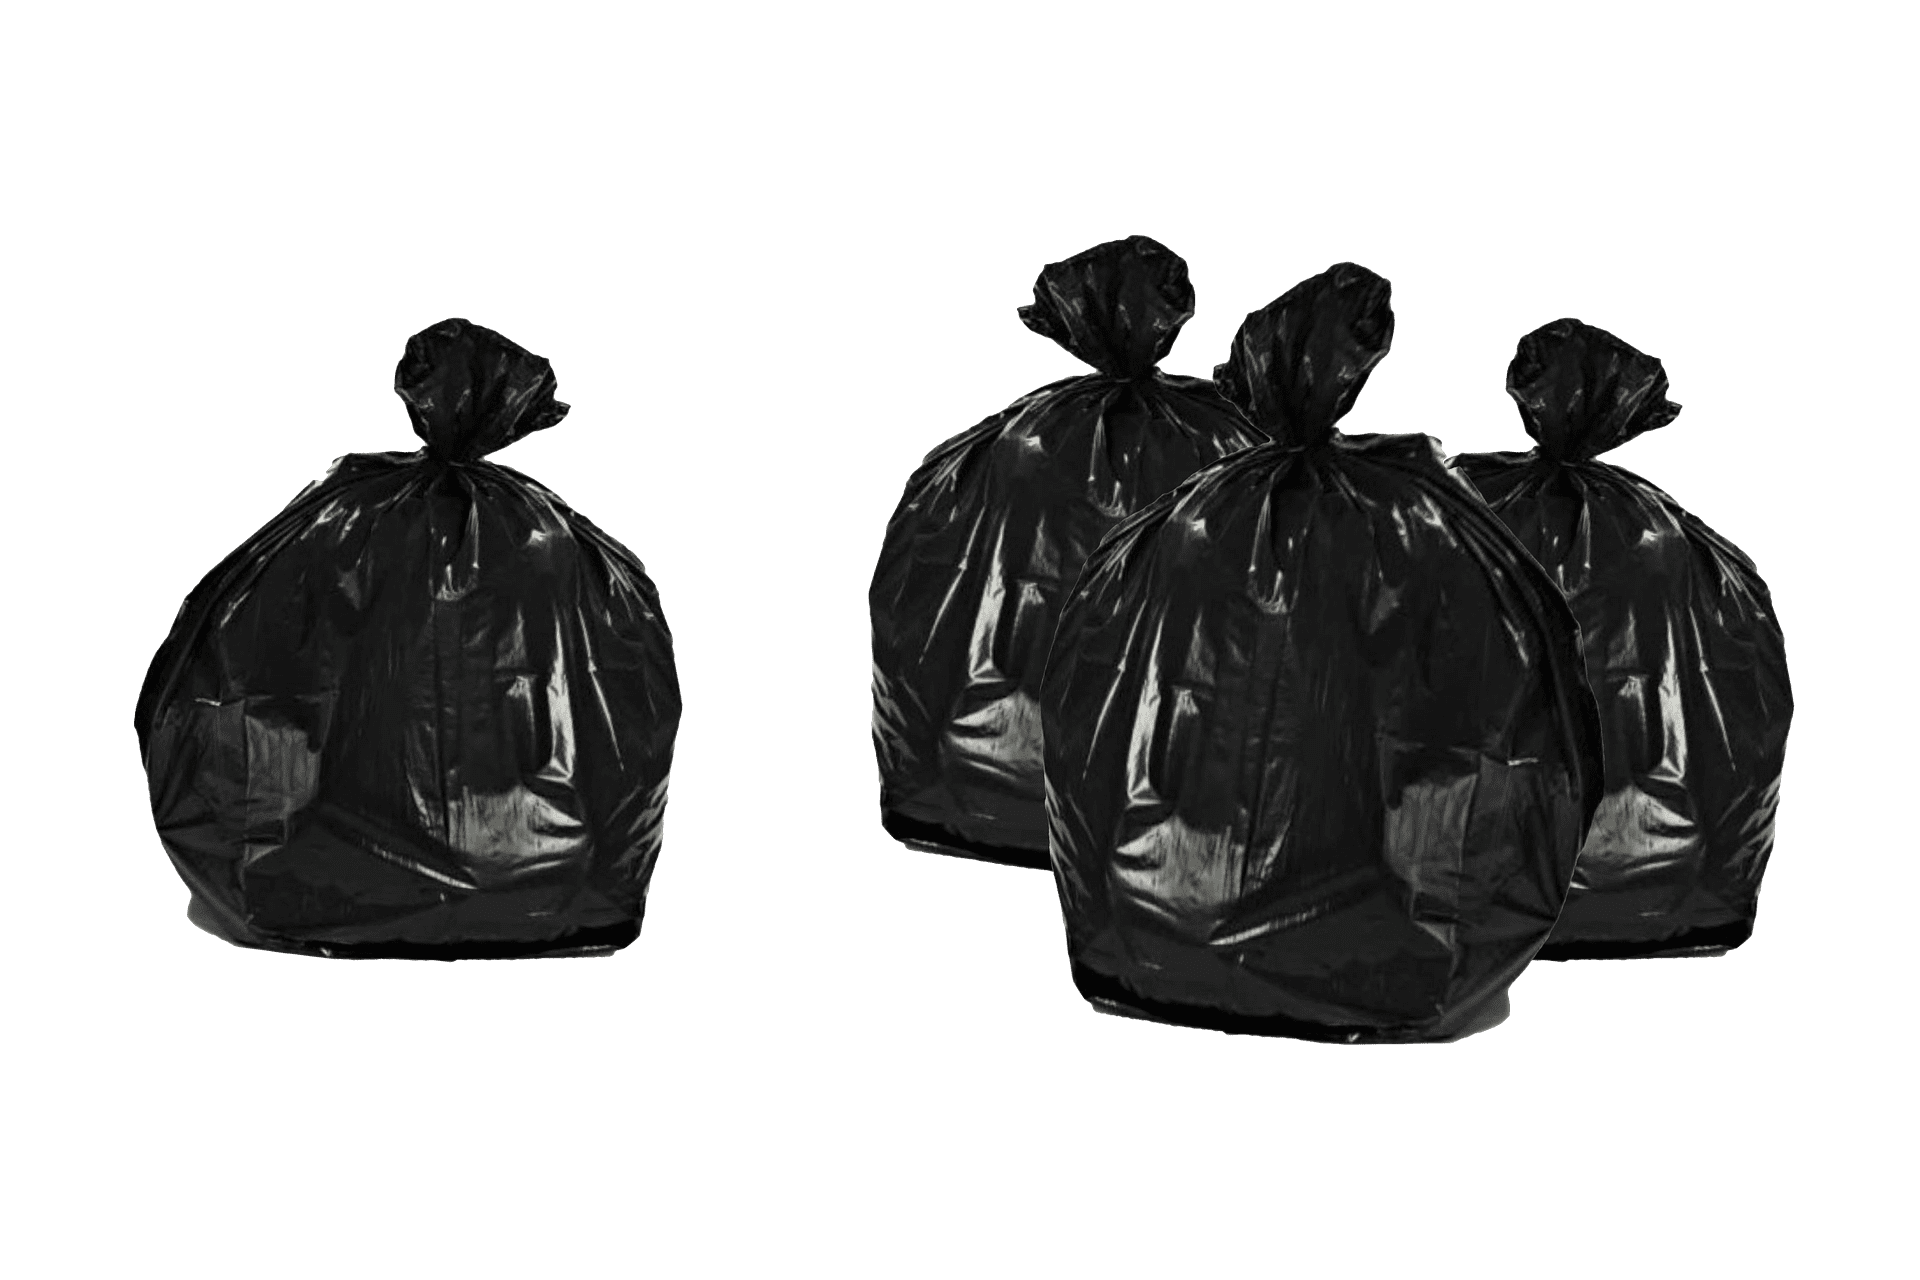 Black bin bags containing general waste